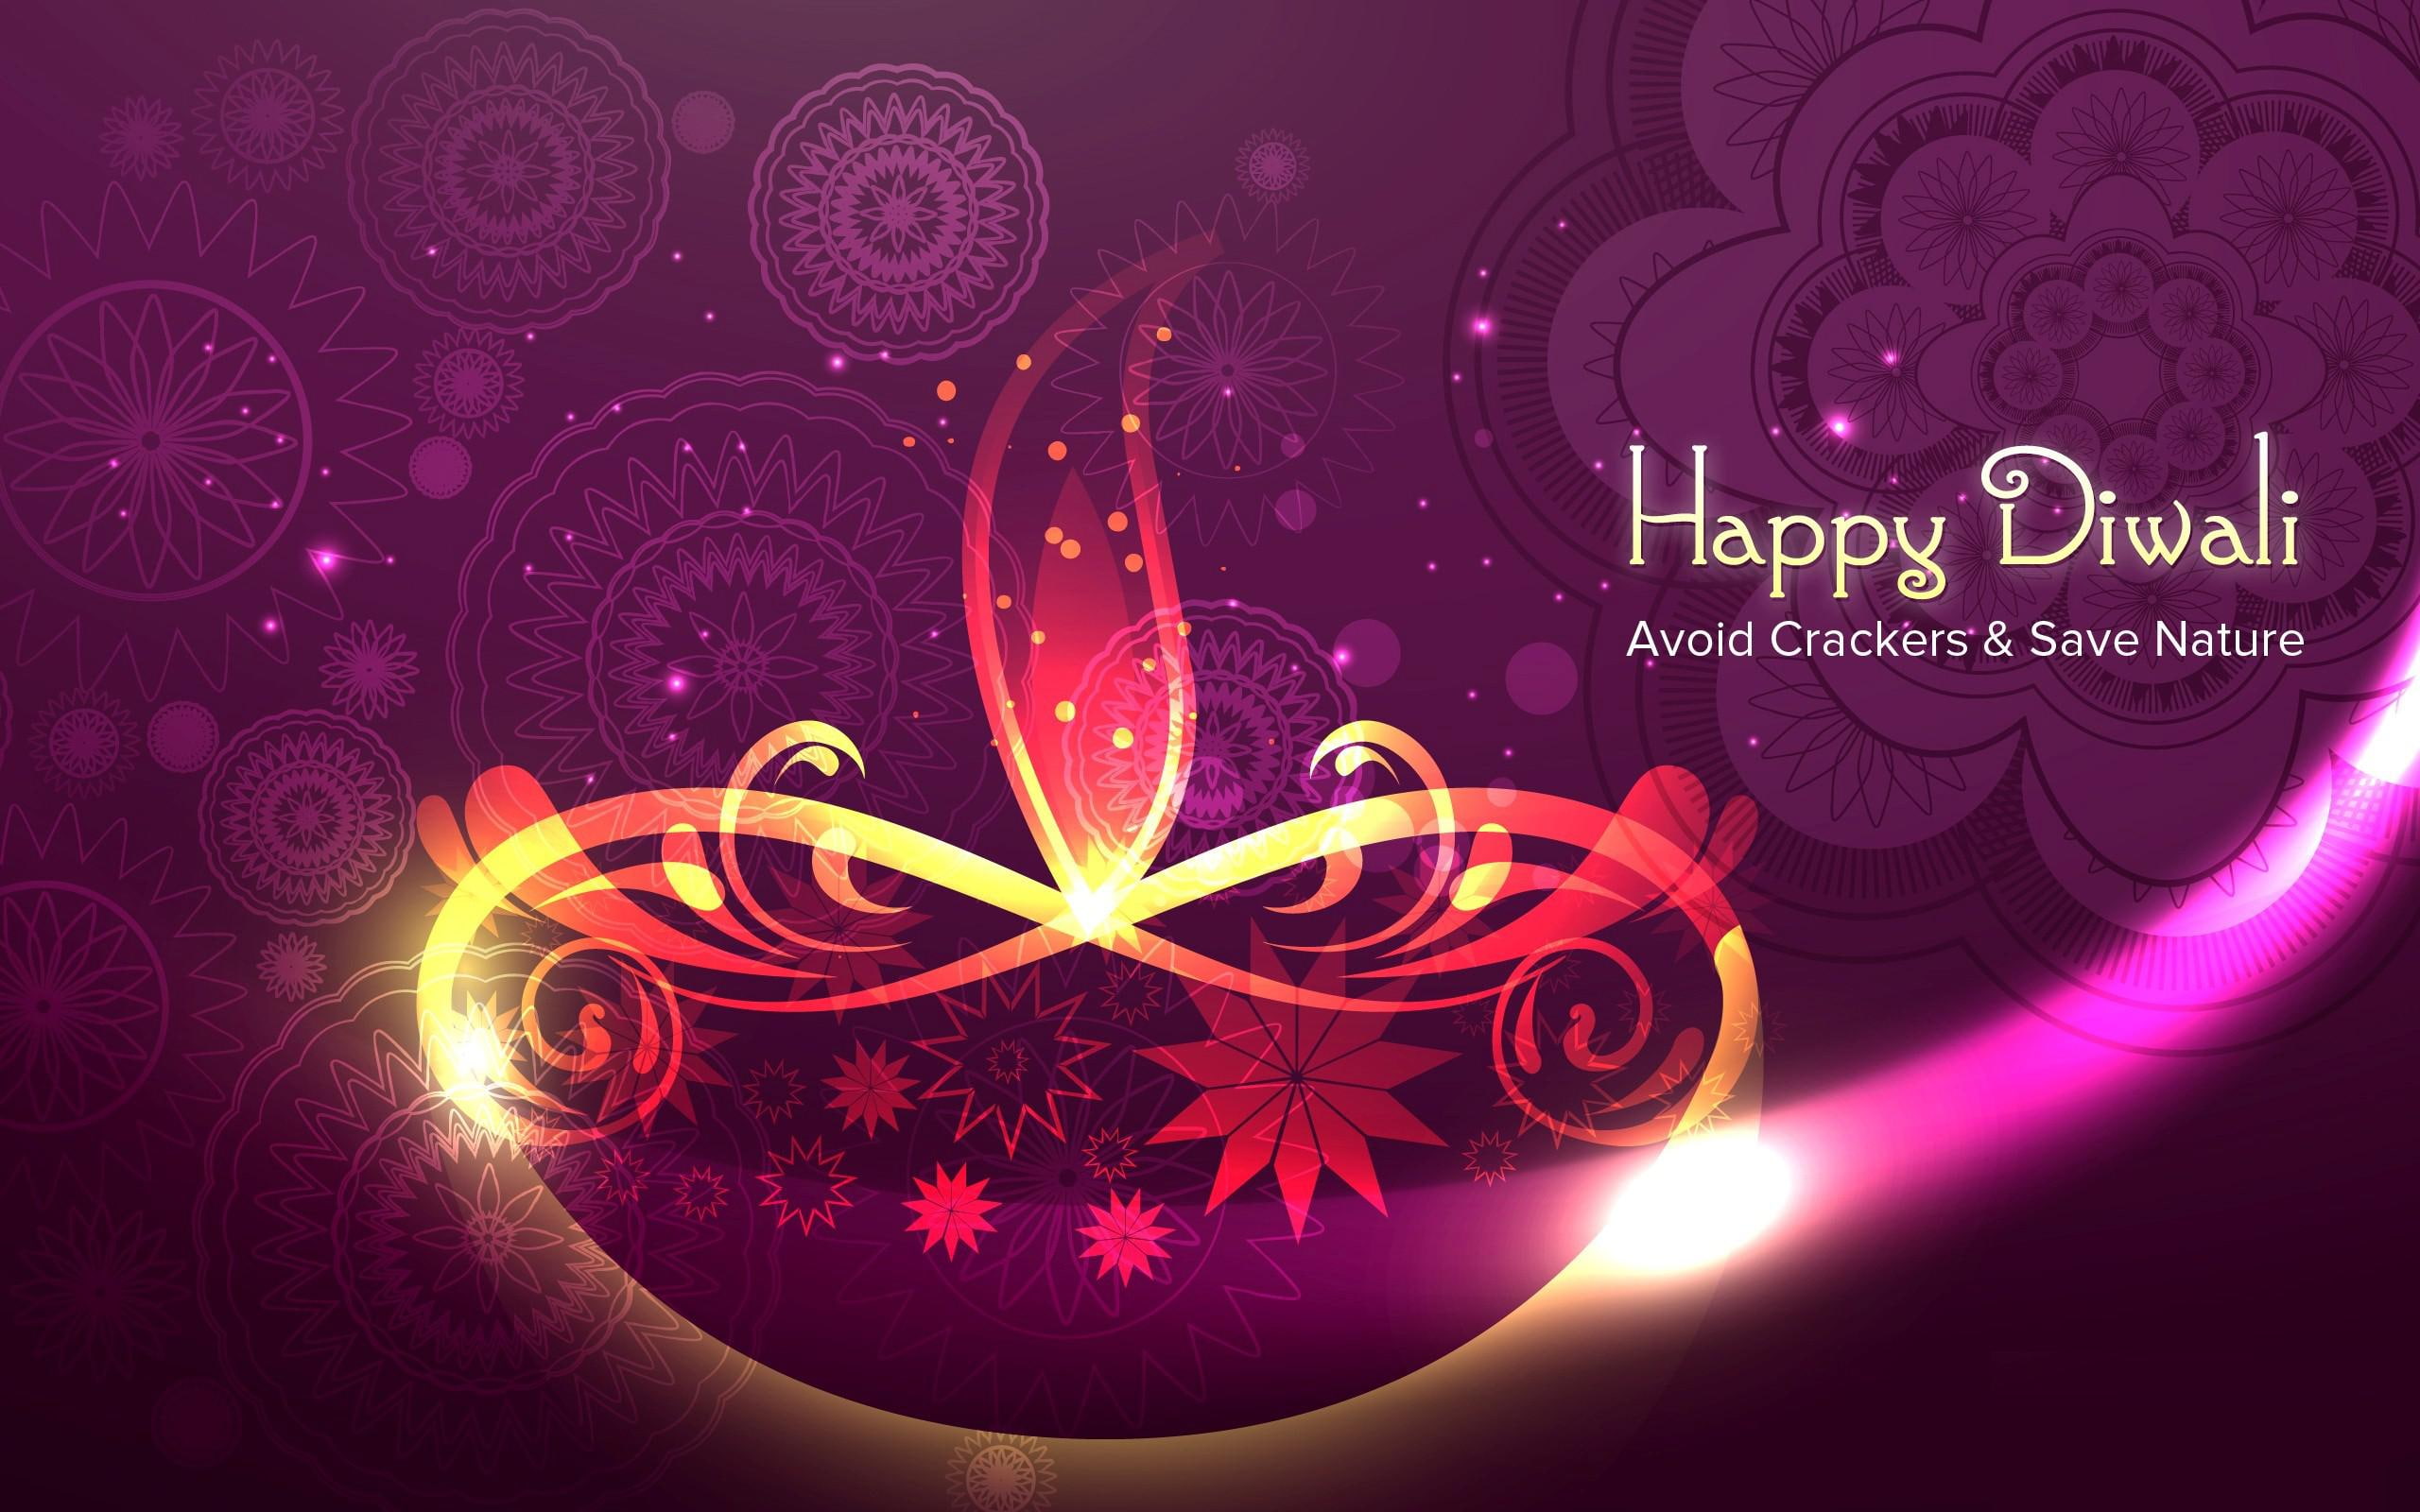 Have Safe and Save Nature Wish You Happy Diwali HD Images, lamp